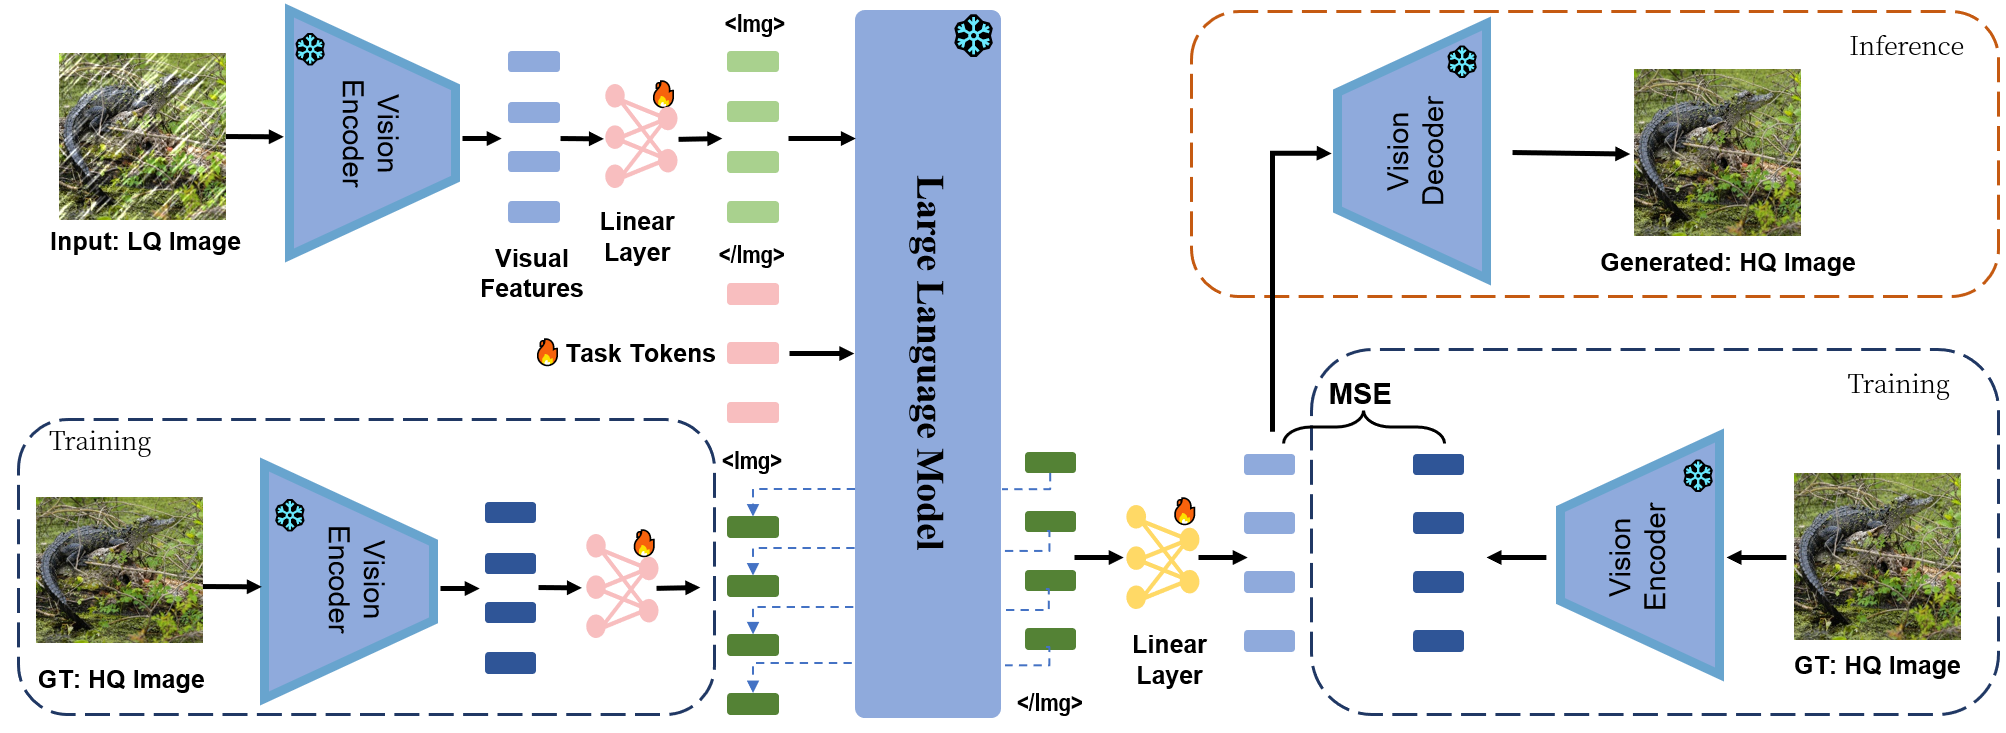 Main pipeline of LM4LV